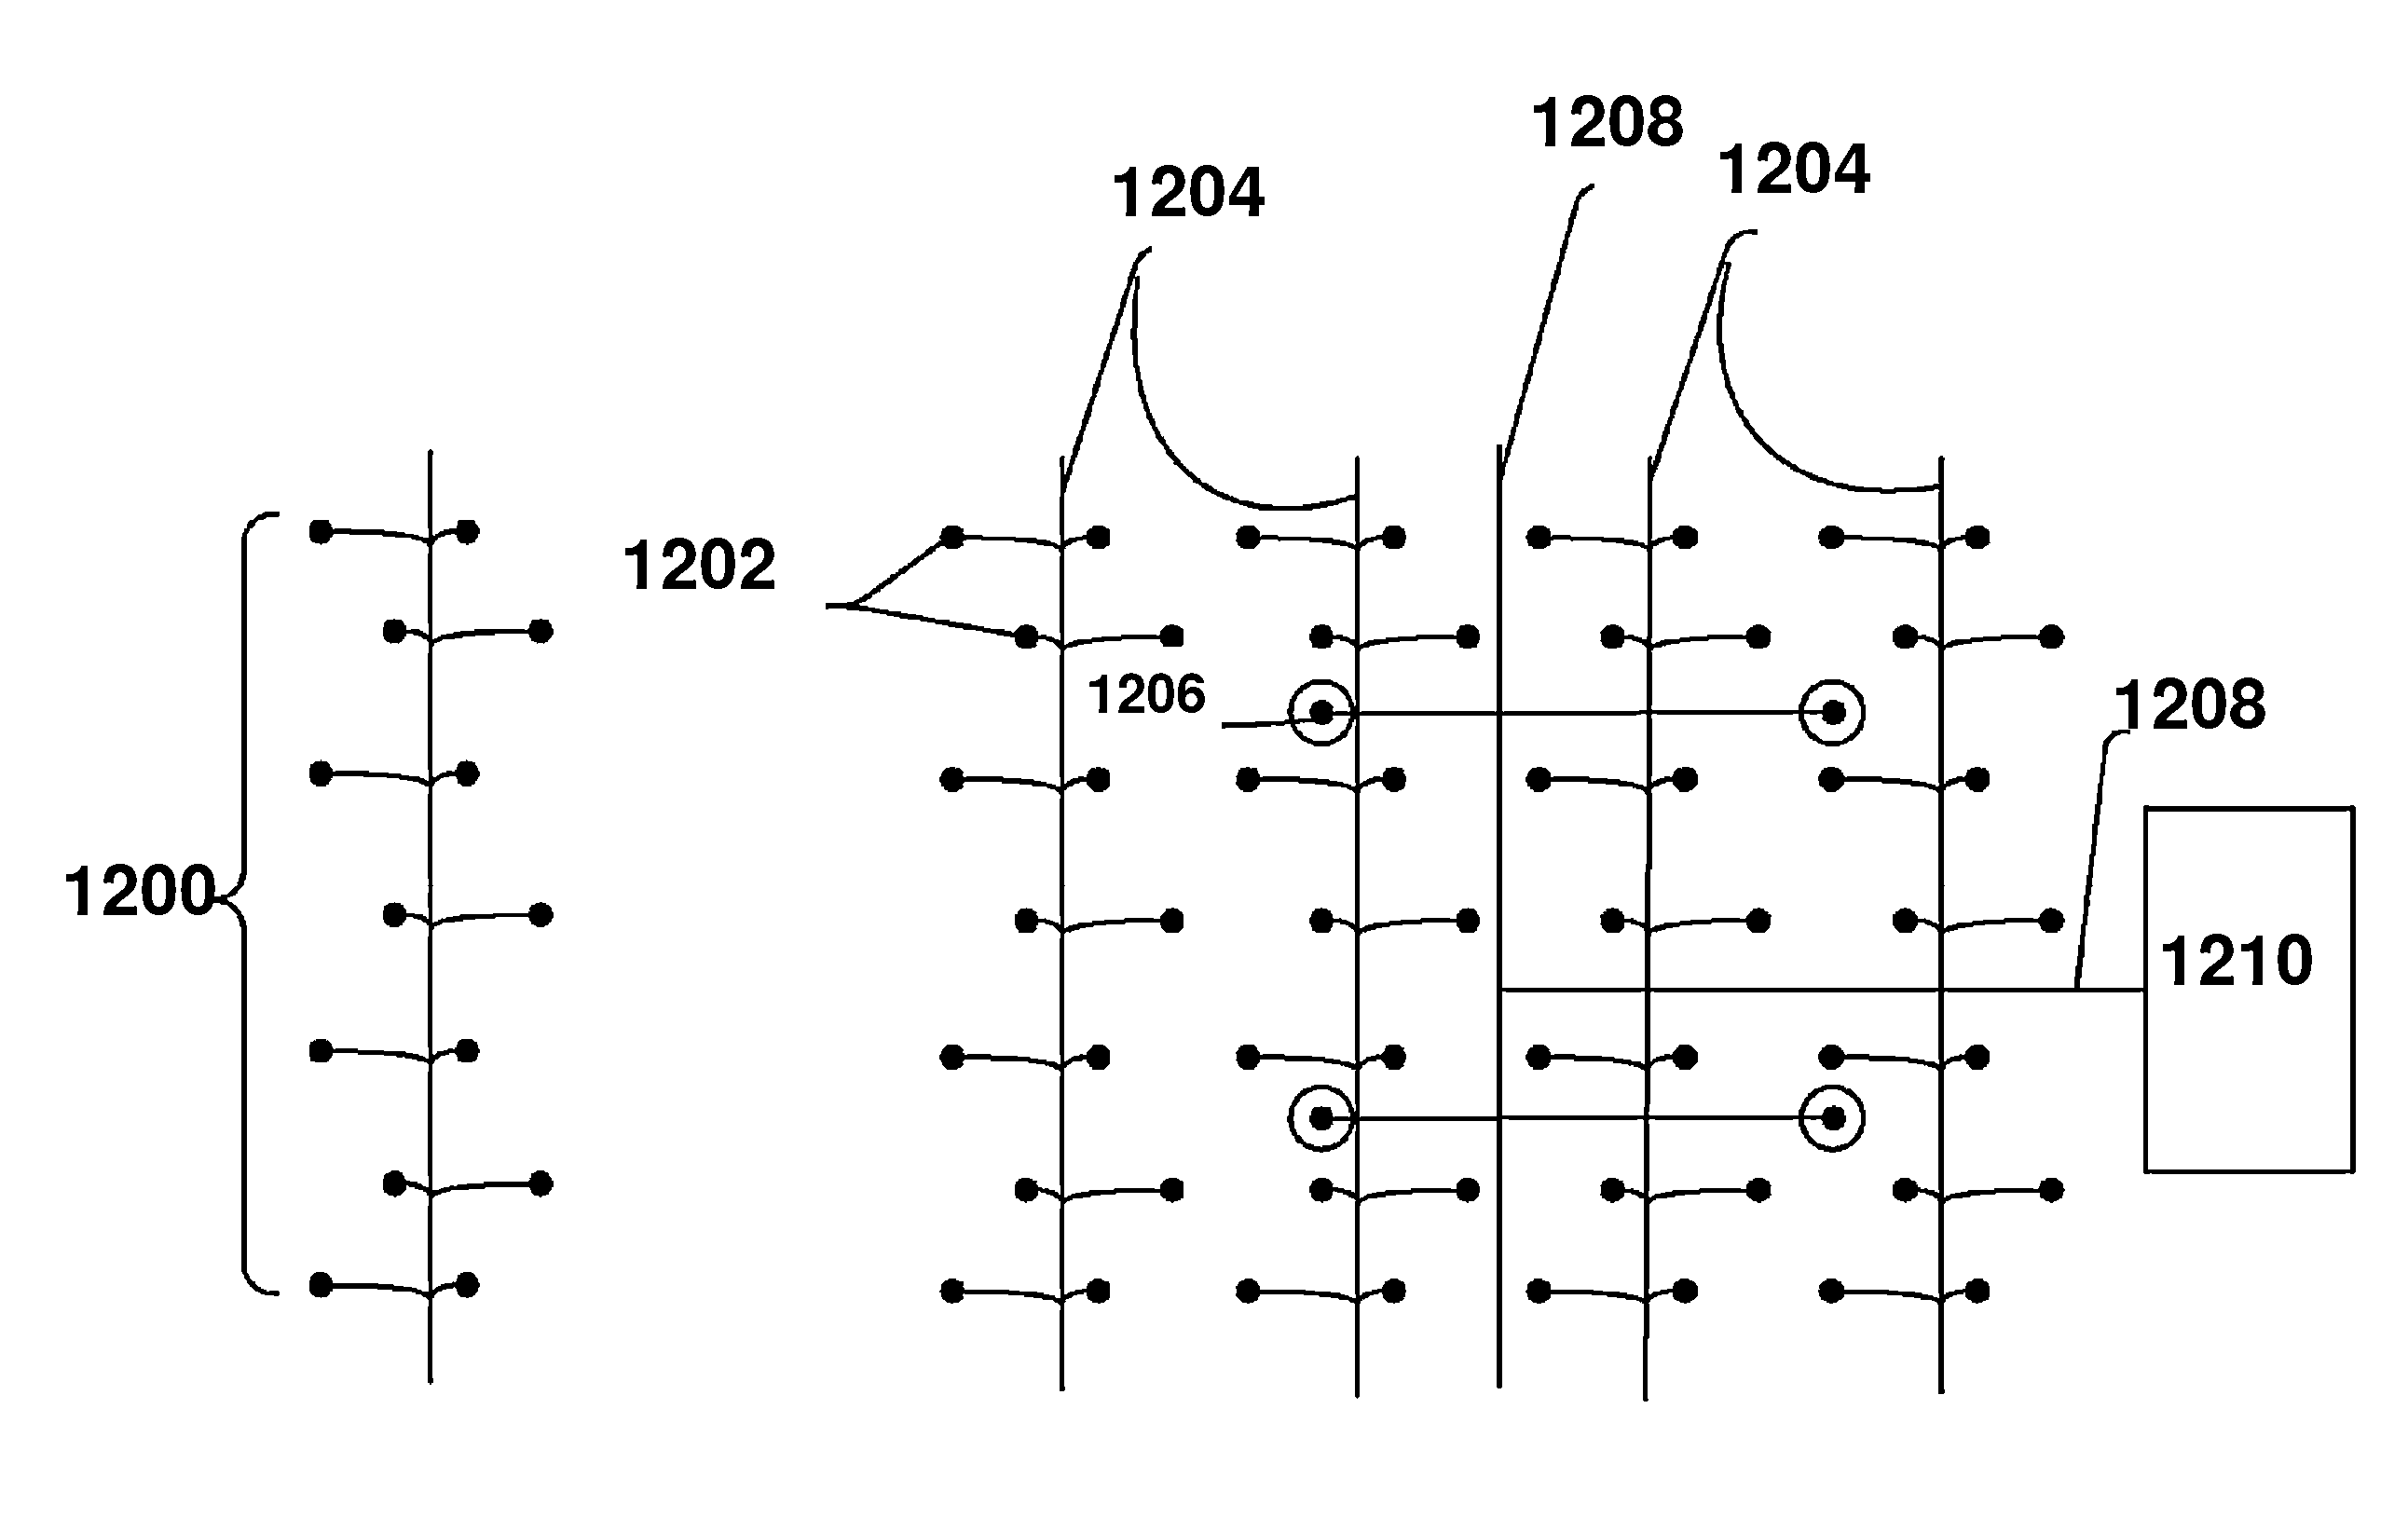 Heater pattern for in situ thermal processing of a subsurface hydrocarbon containing formation